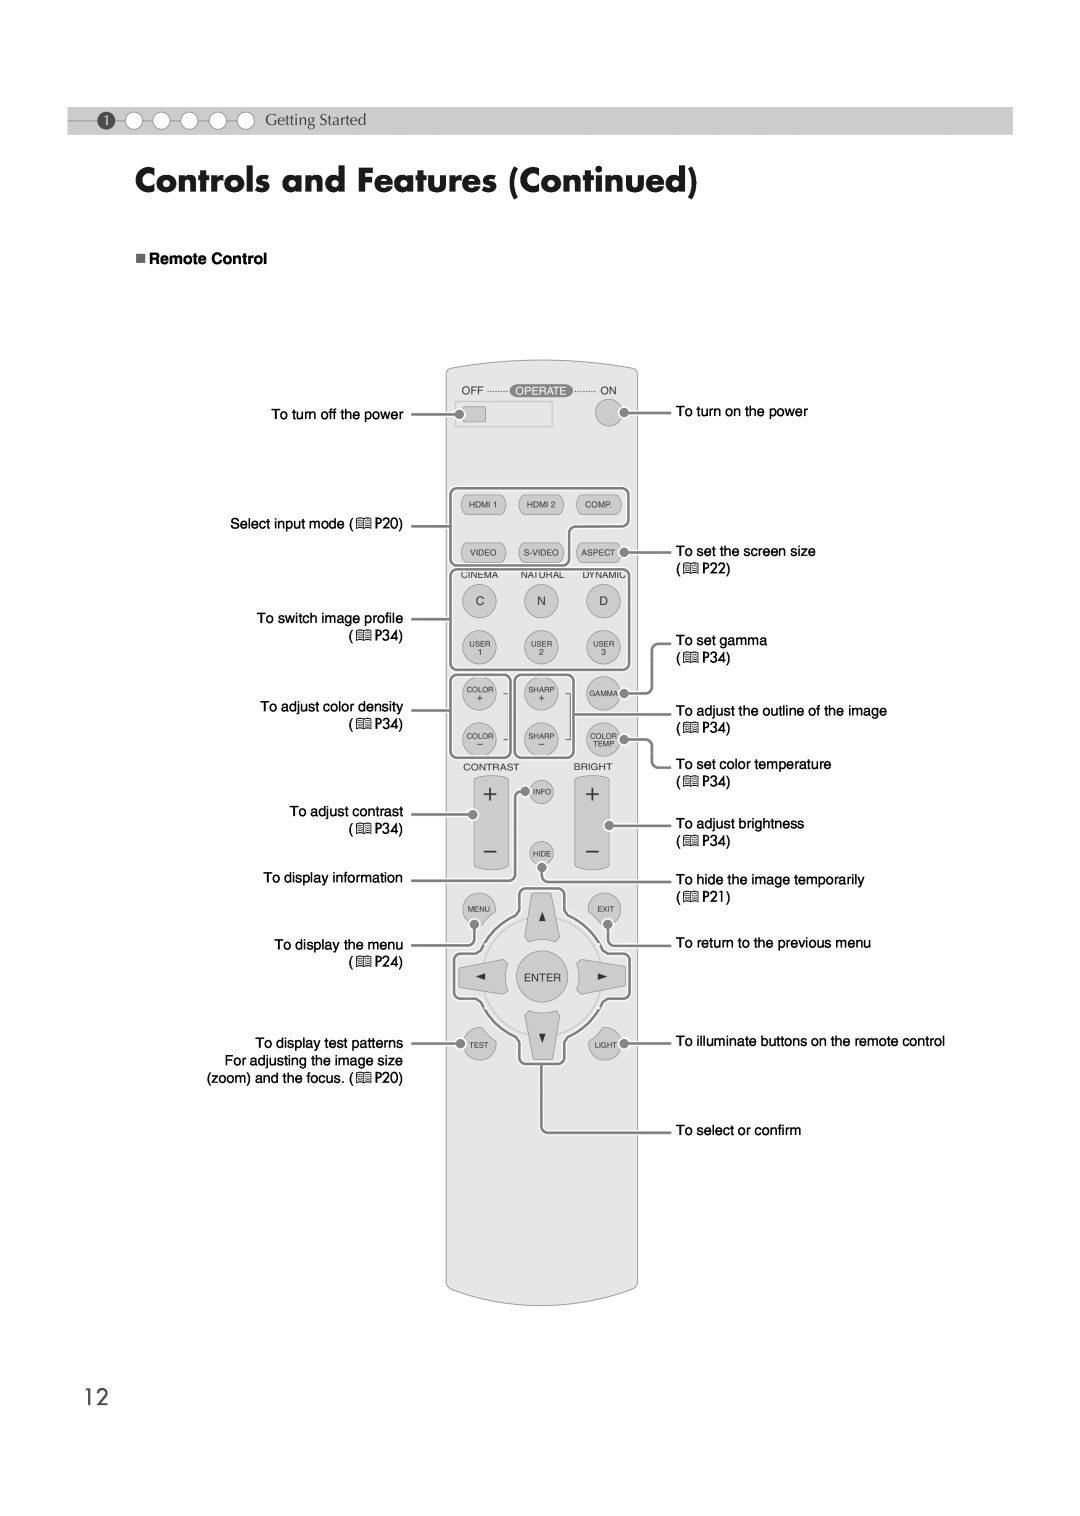 Meridian Audio MF-10 Controls and Features Continued, „ Remote Control, Getting Started, To turn off the power, pP22, pP34 